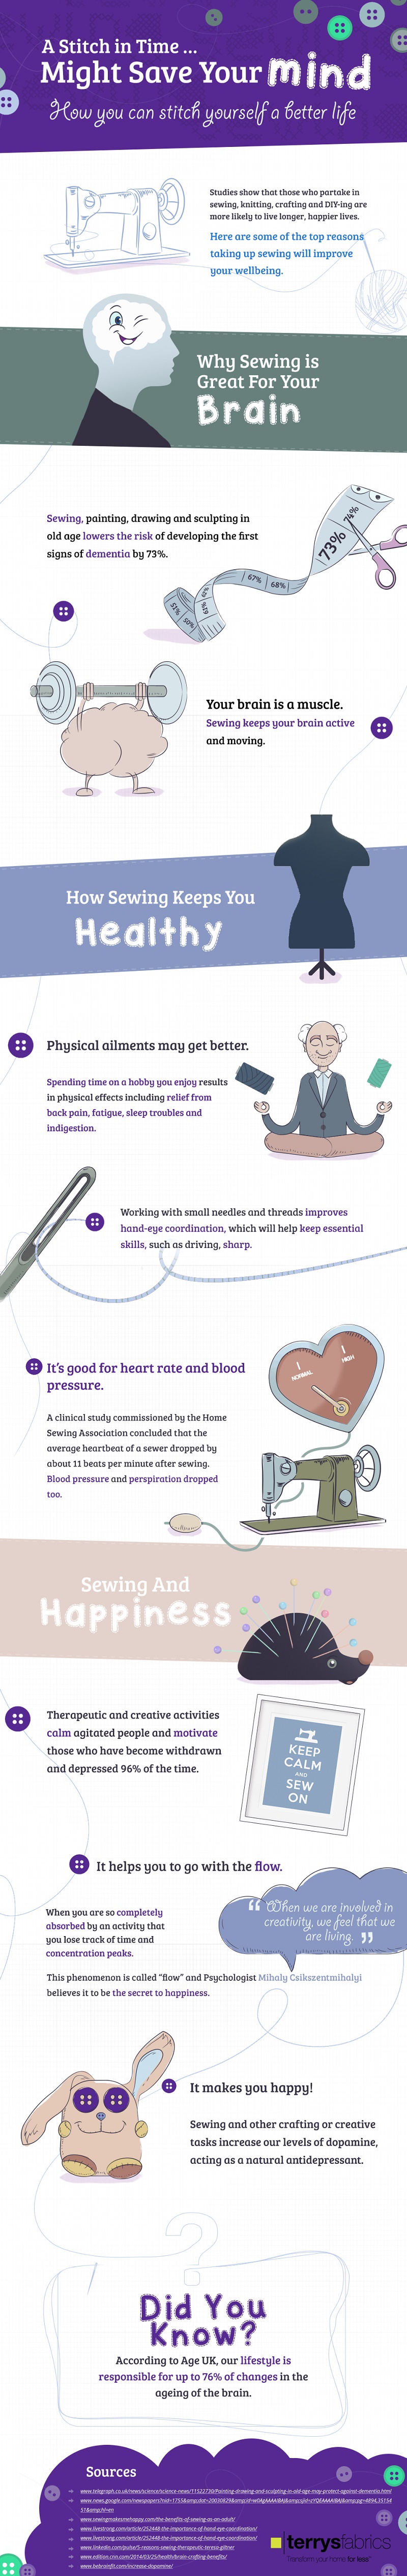 health-benefits-of-sewing